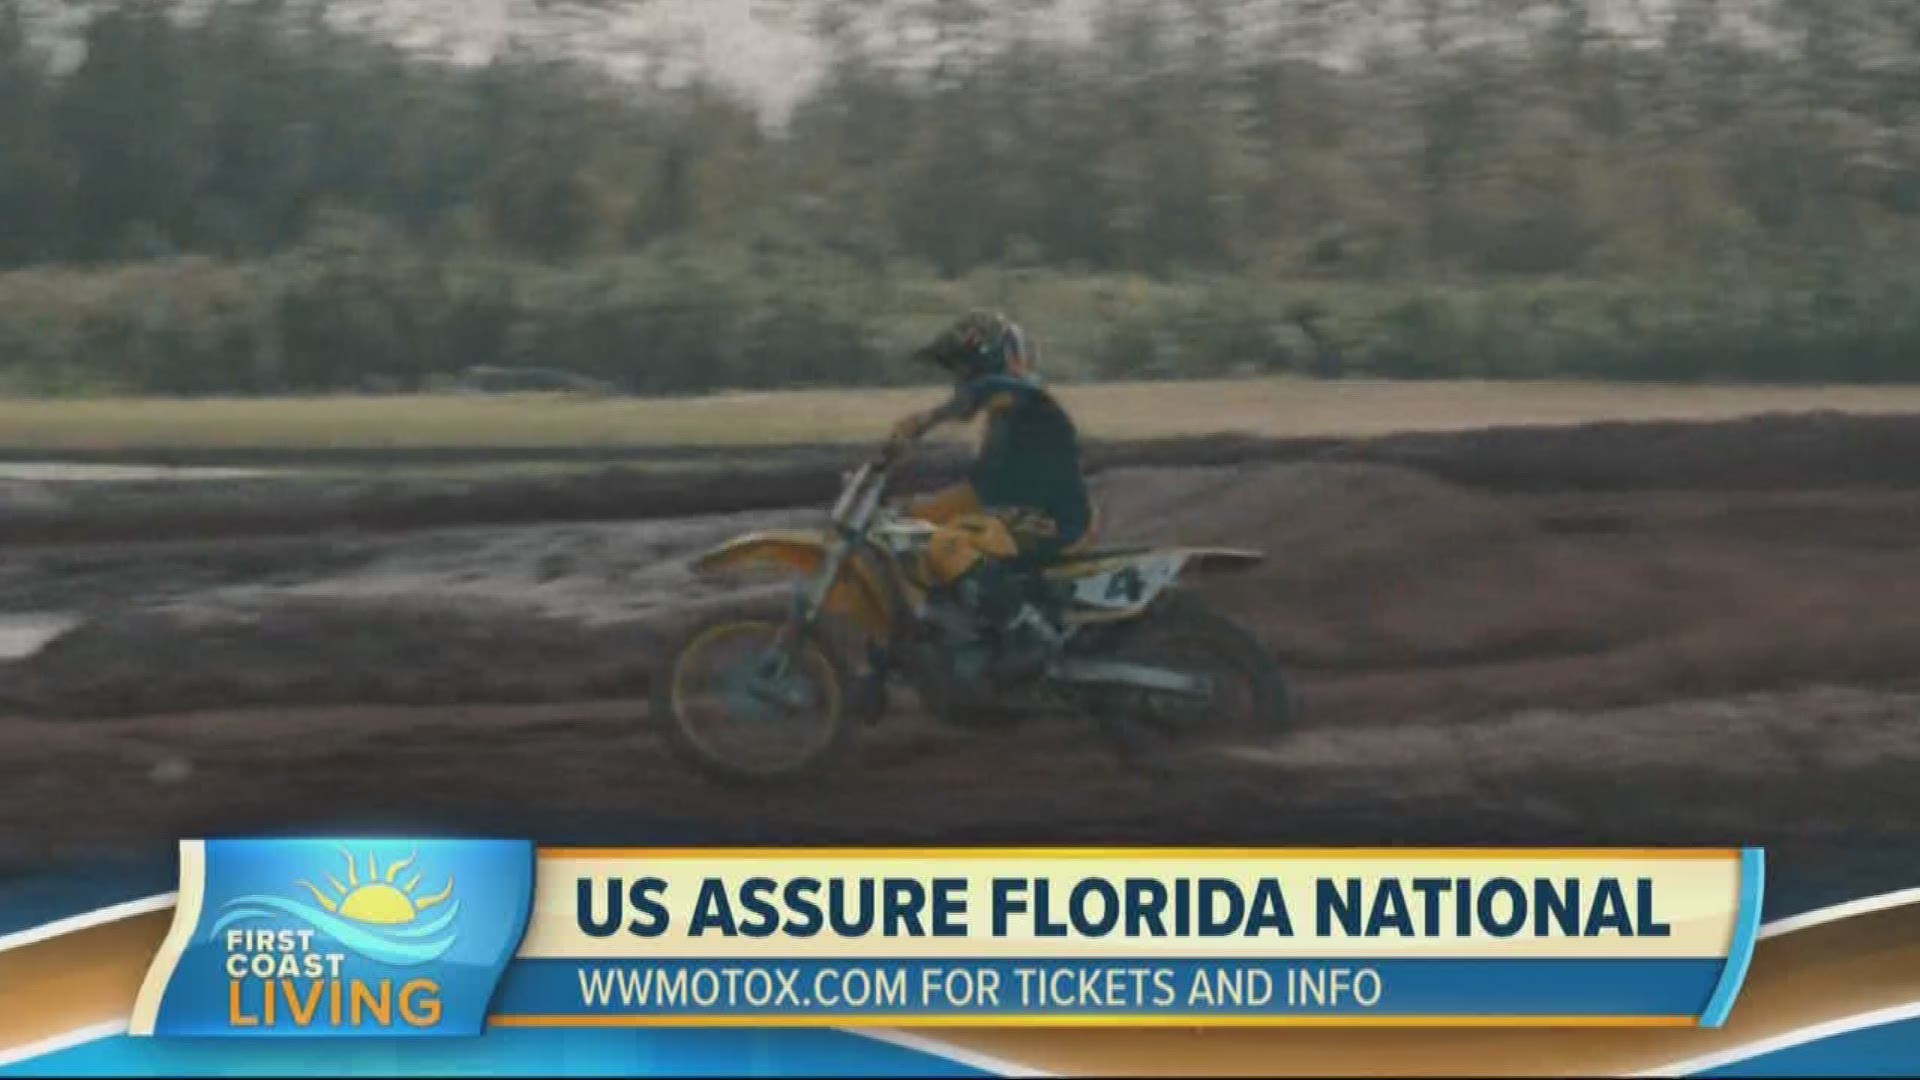 U.S. Assure Florida National professional motocross race comes to Jacksonville for the weekend.